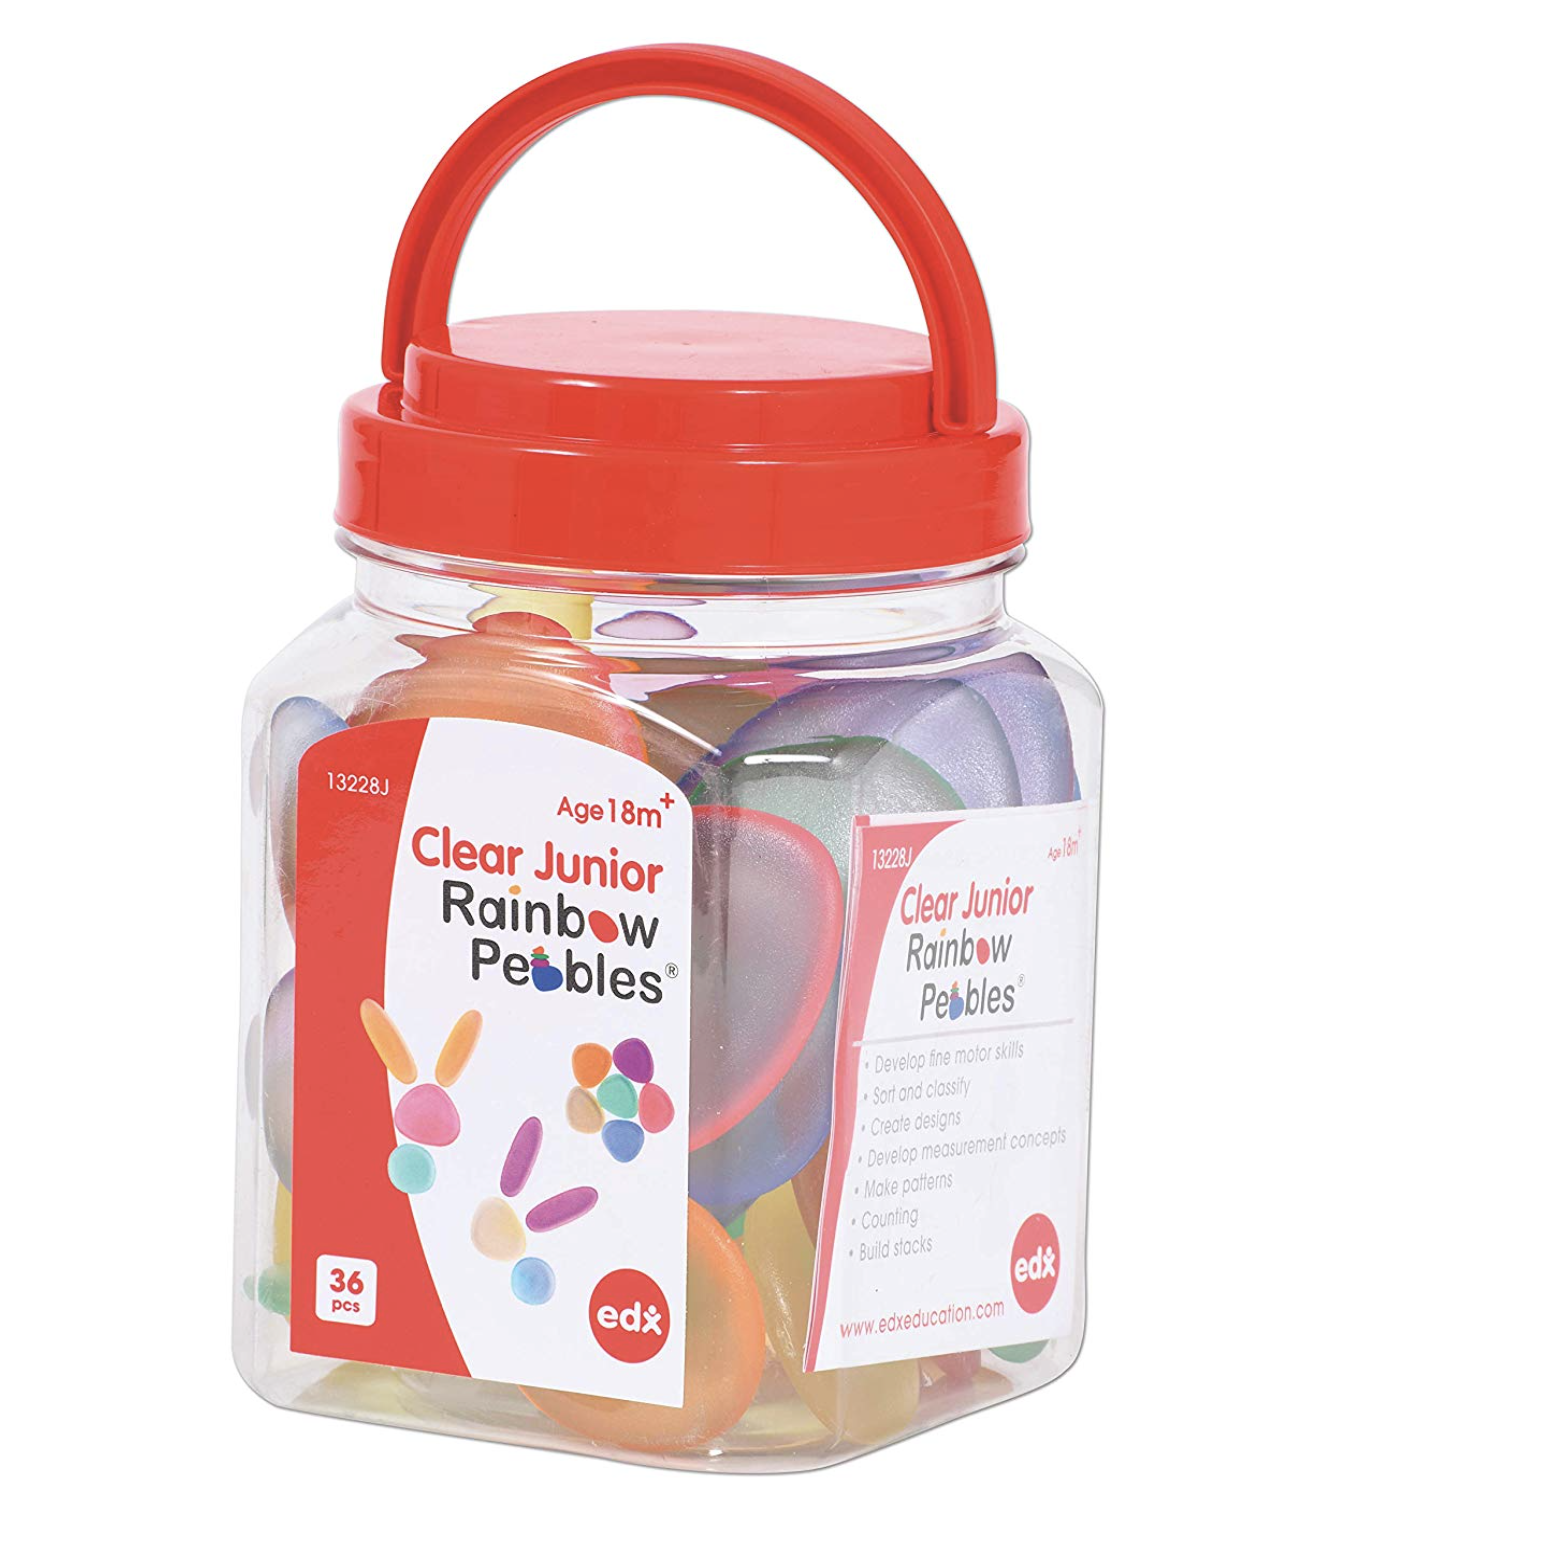 Clear Junior Rainbow Pebbles 36 Pieces Assorted